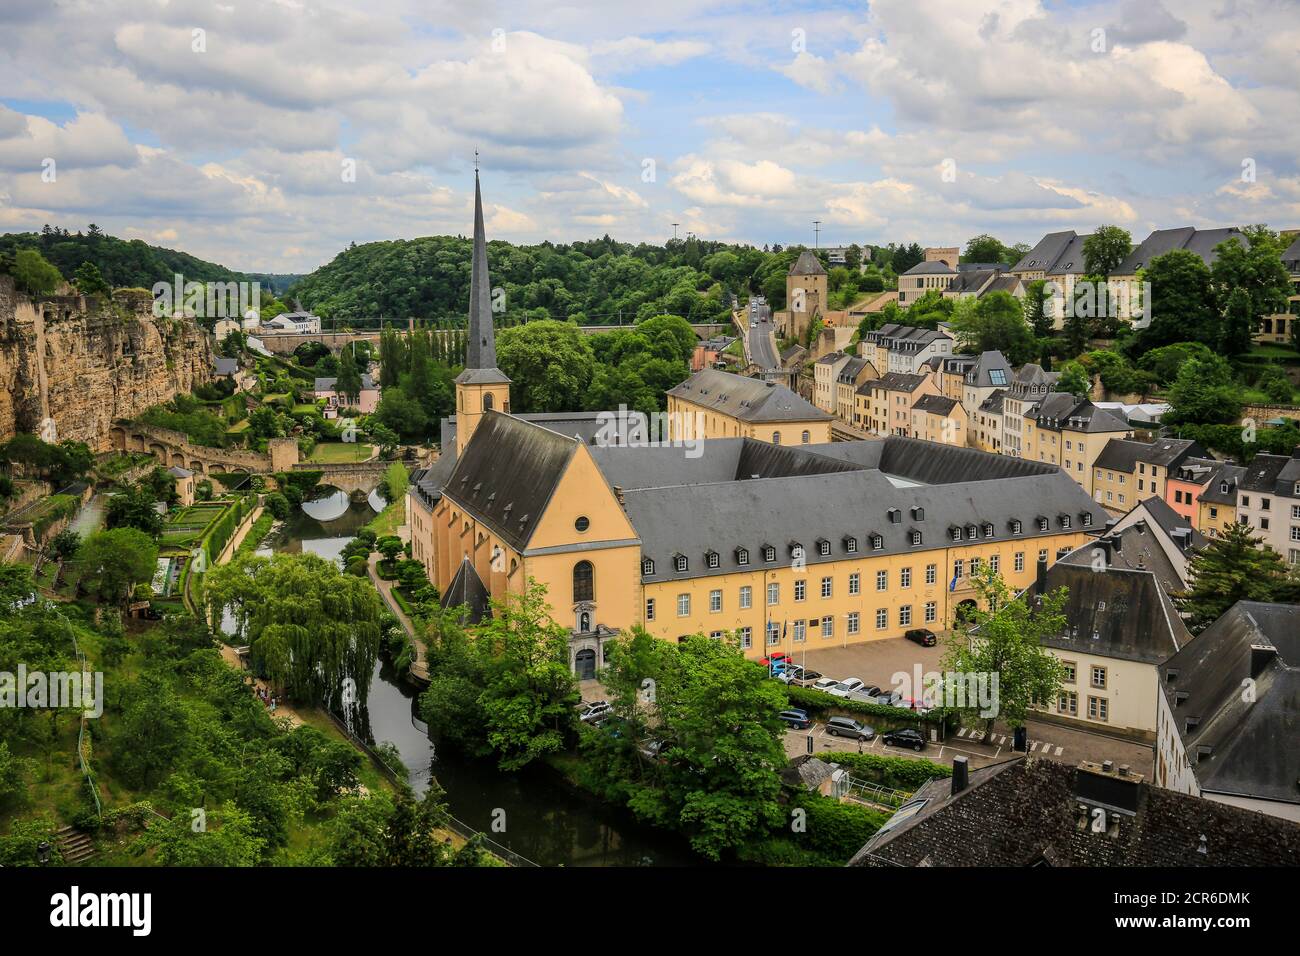 Neumünster Abbey in the lower town of Grund, Luxembourg City, Grand Duchy of Luxembourg, Europe Stock Photo